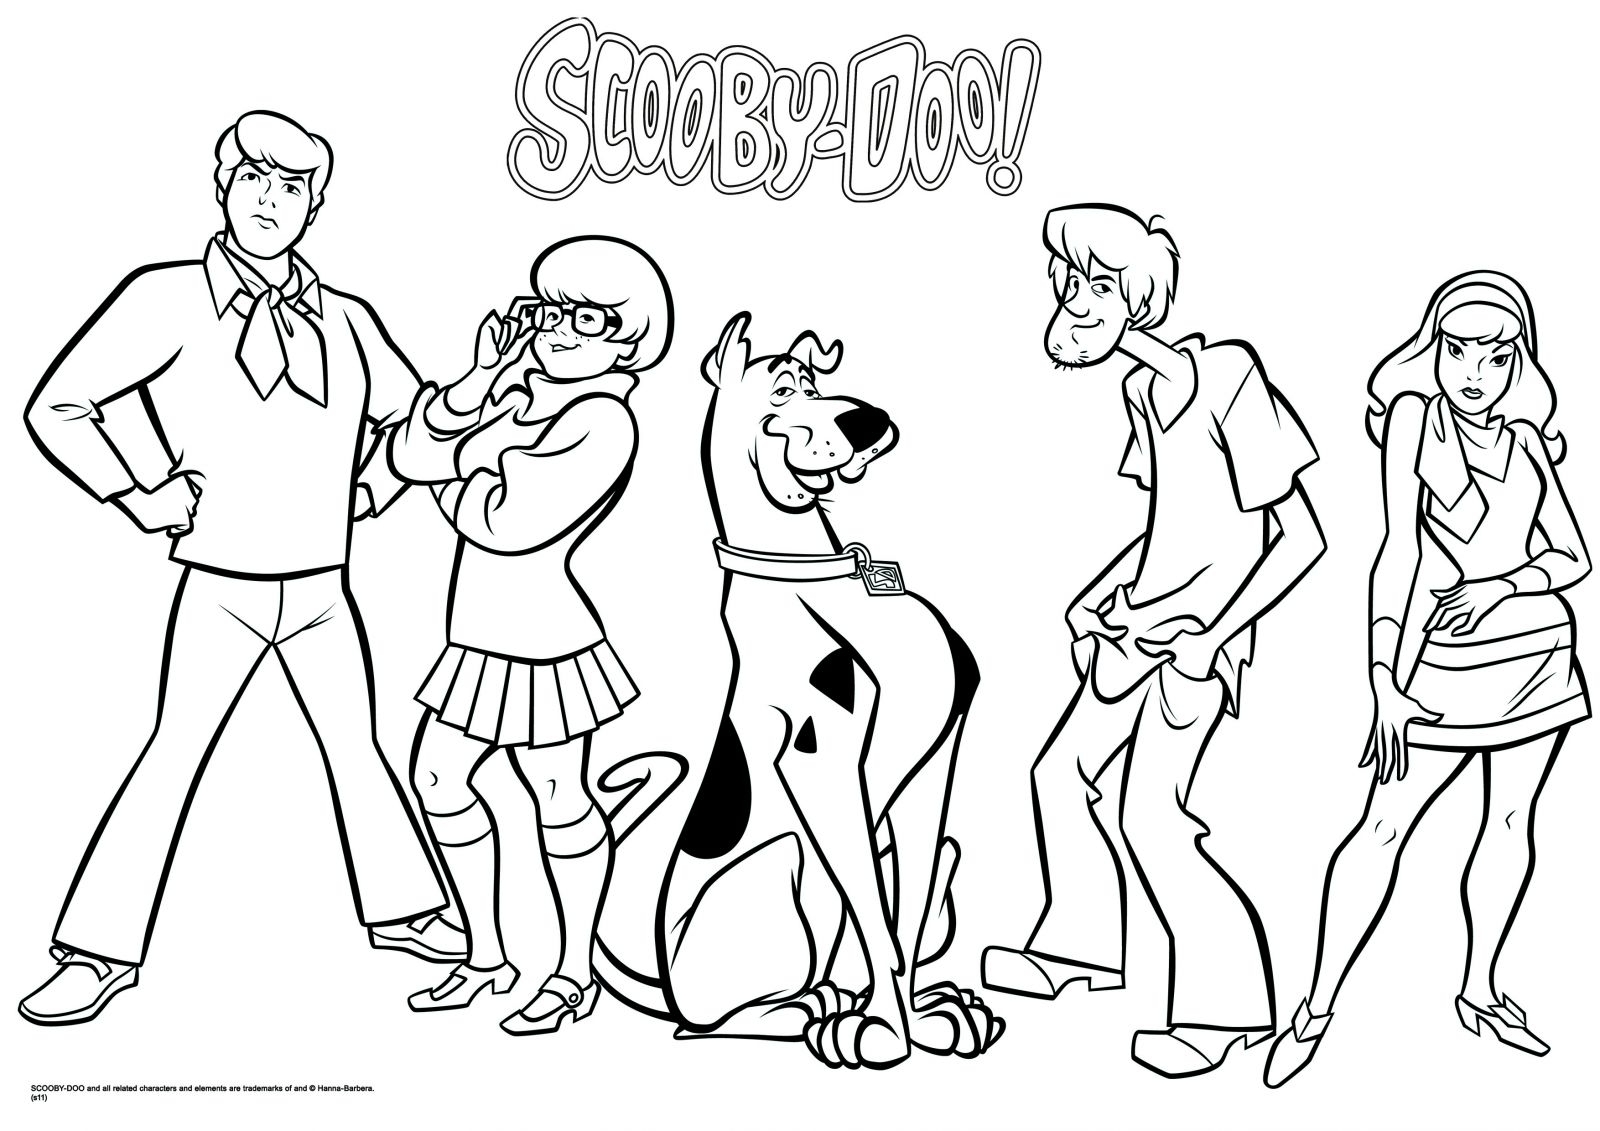 Scooby Gang Coloring Pages Coloring Pages